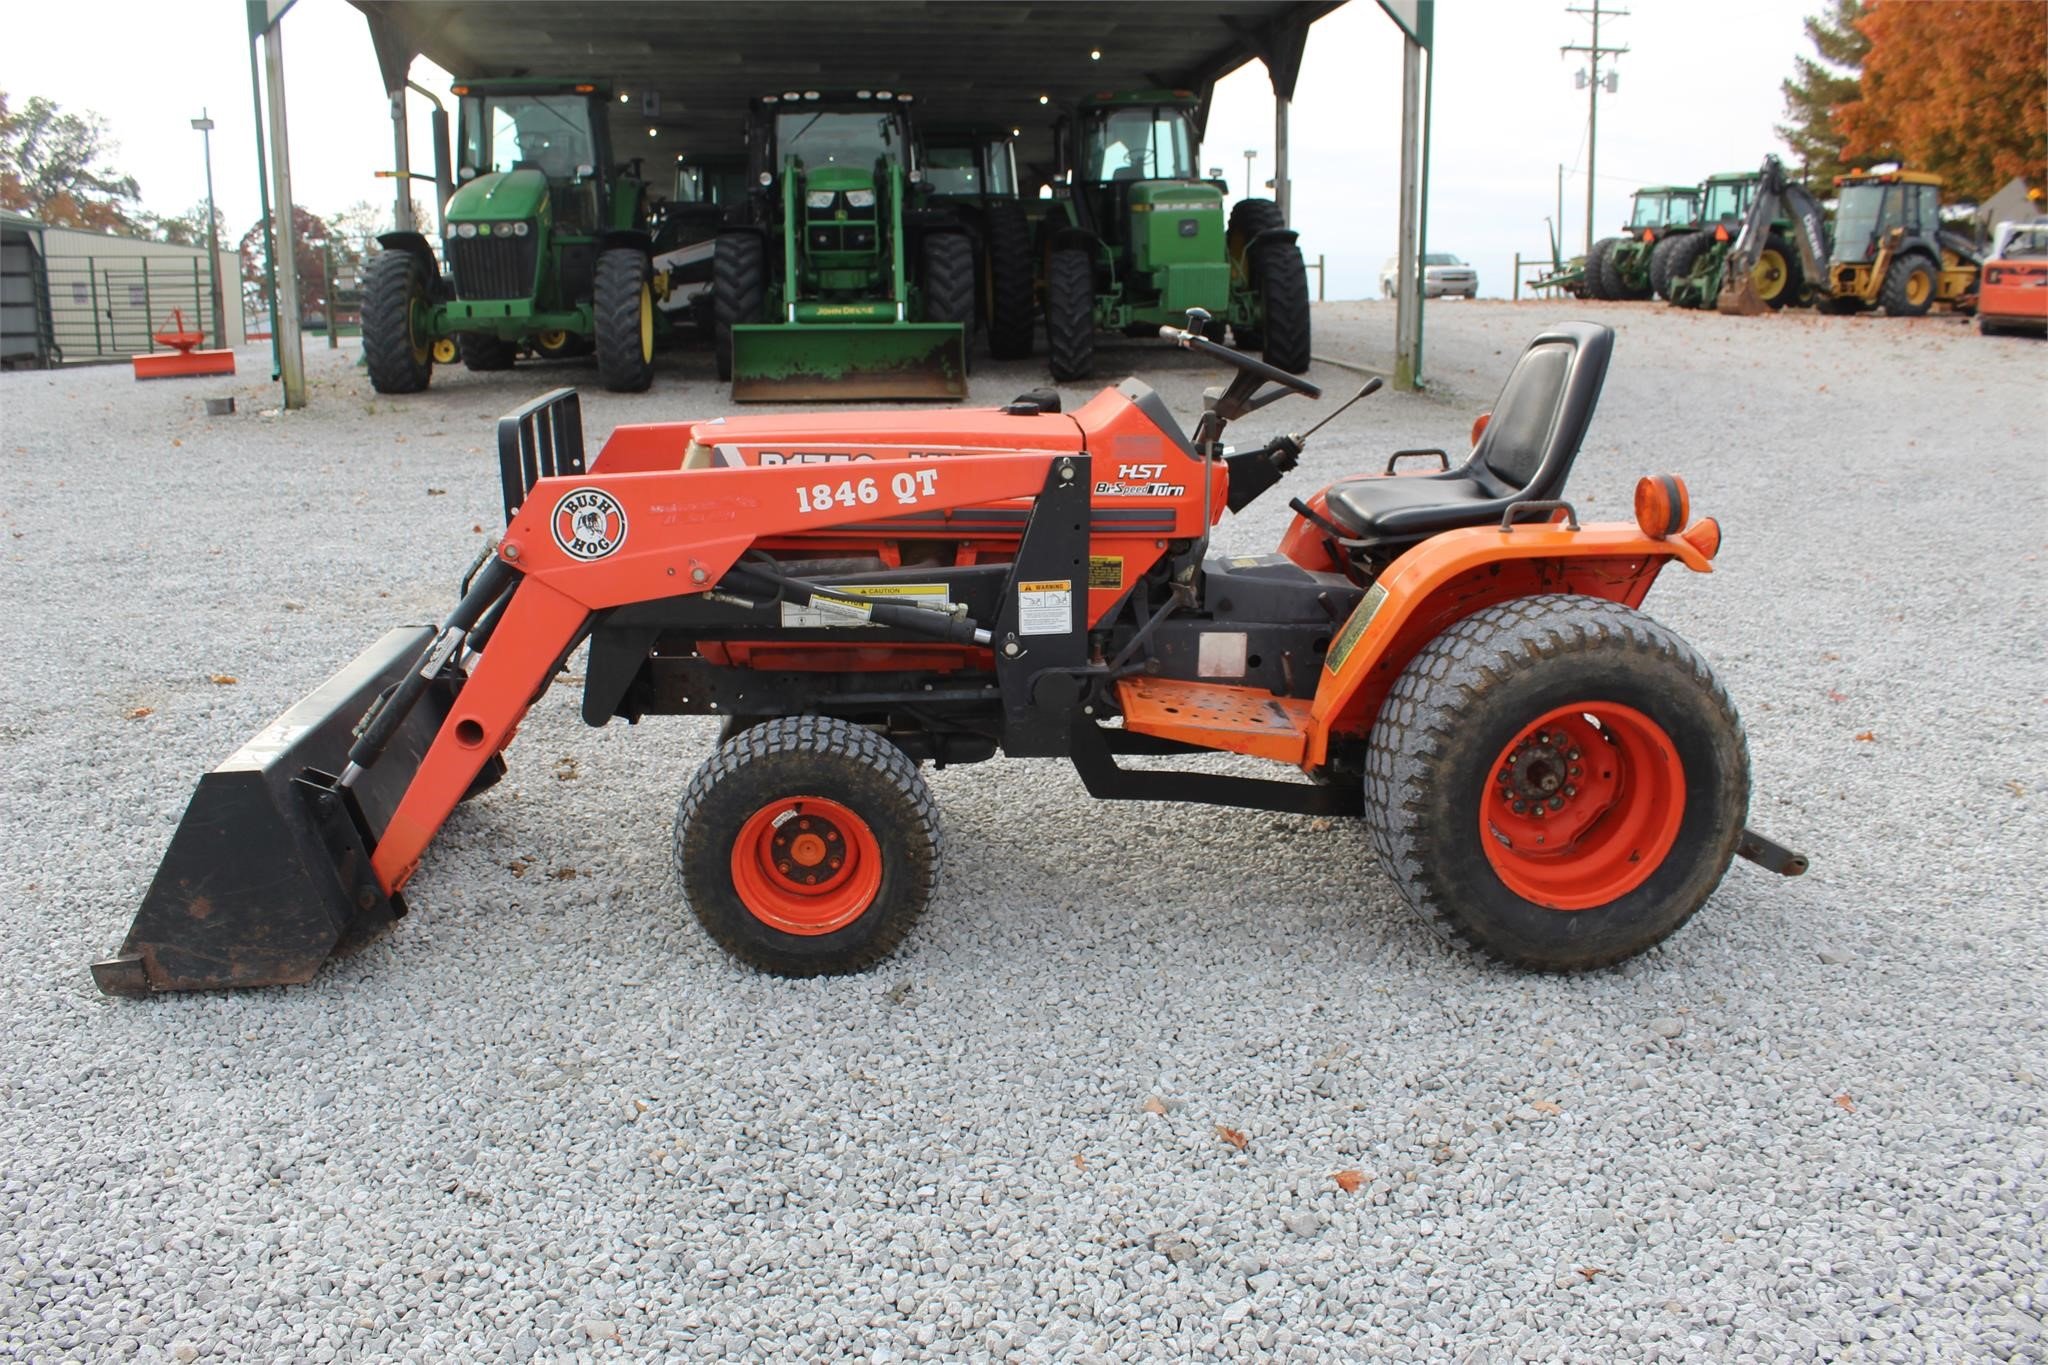 Used Kubota Farm Equipment Auction Results 1352 Listings Tractorhouse Com Page 1 Of 55